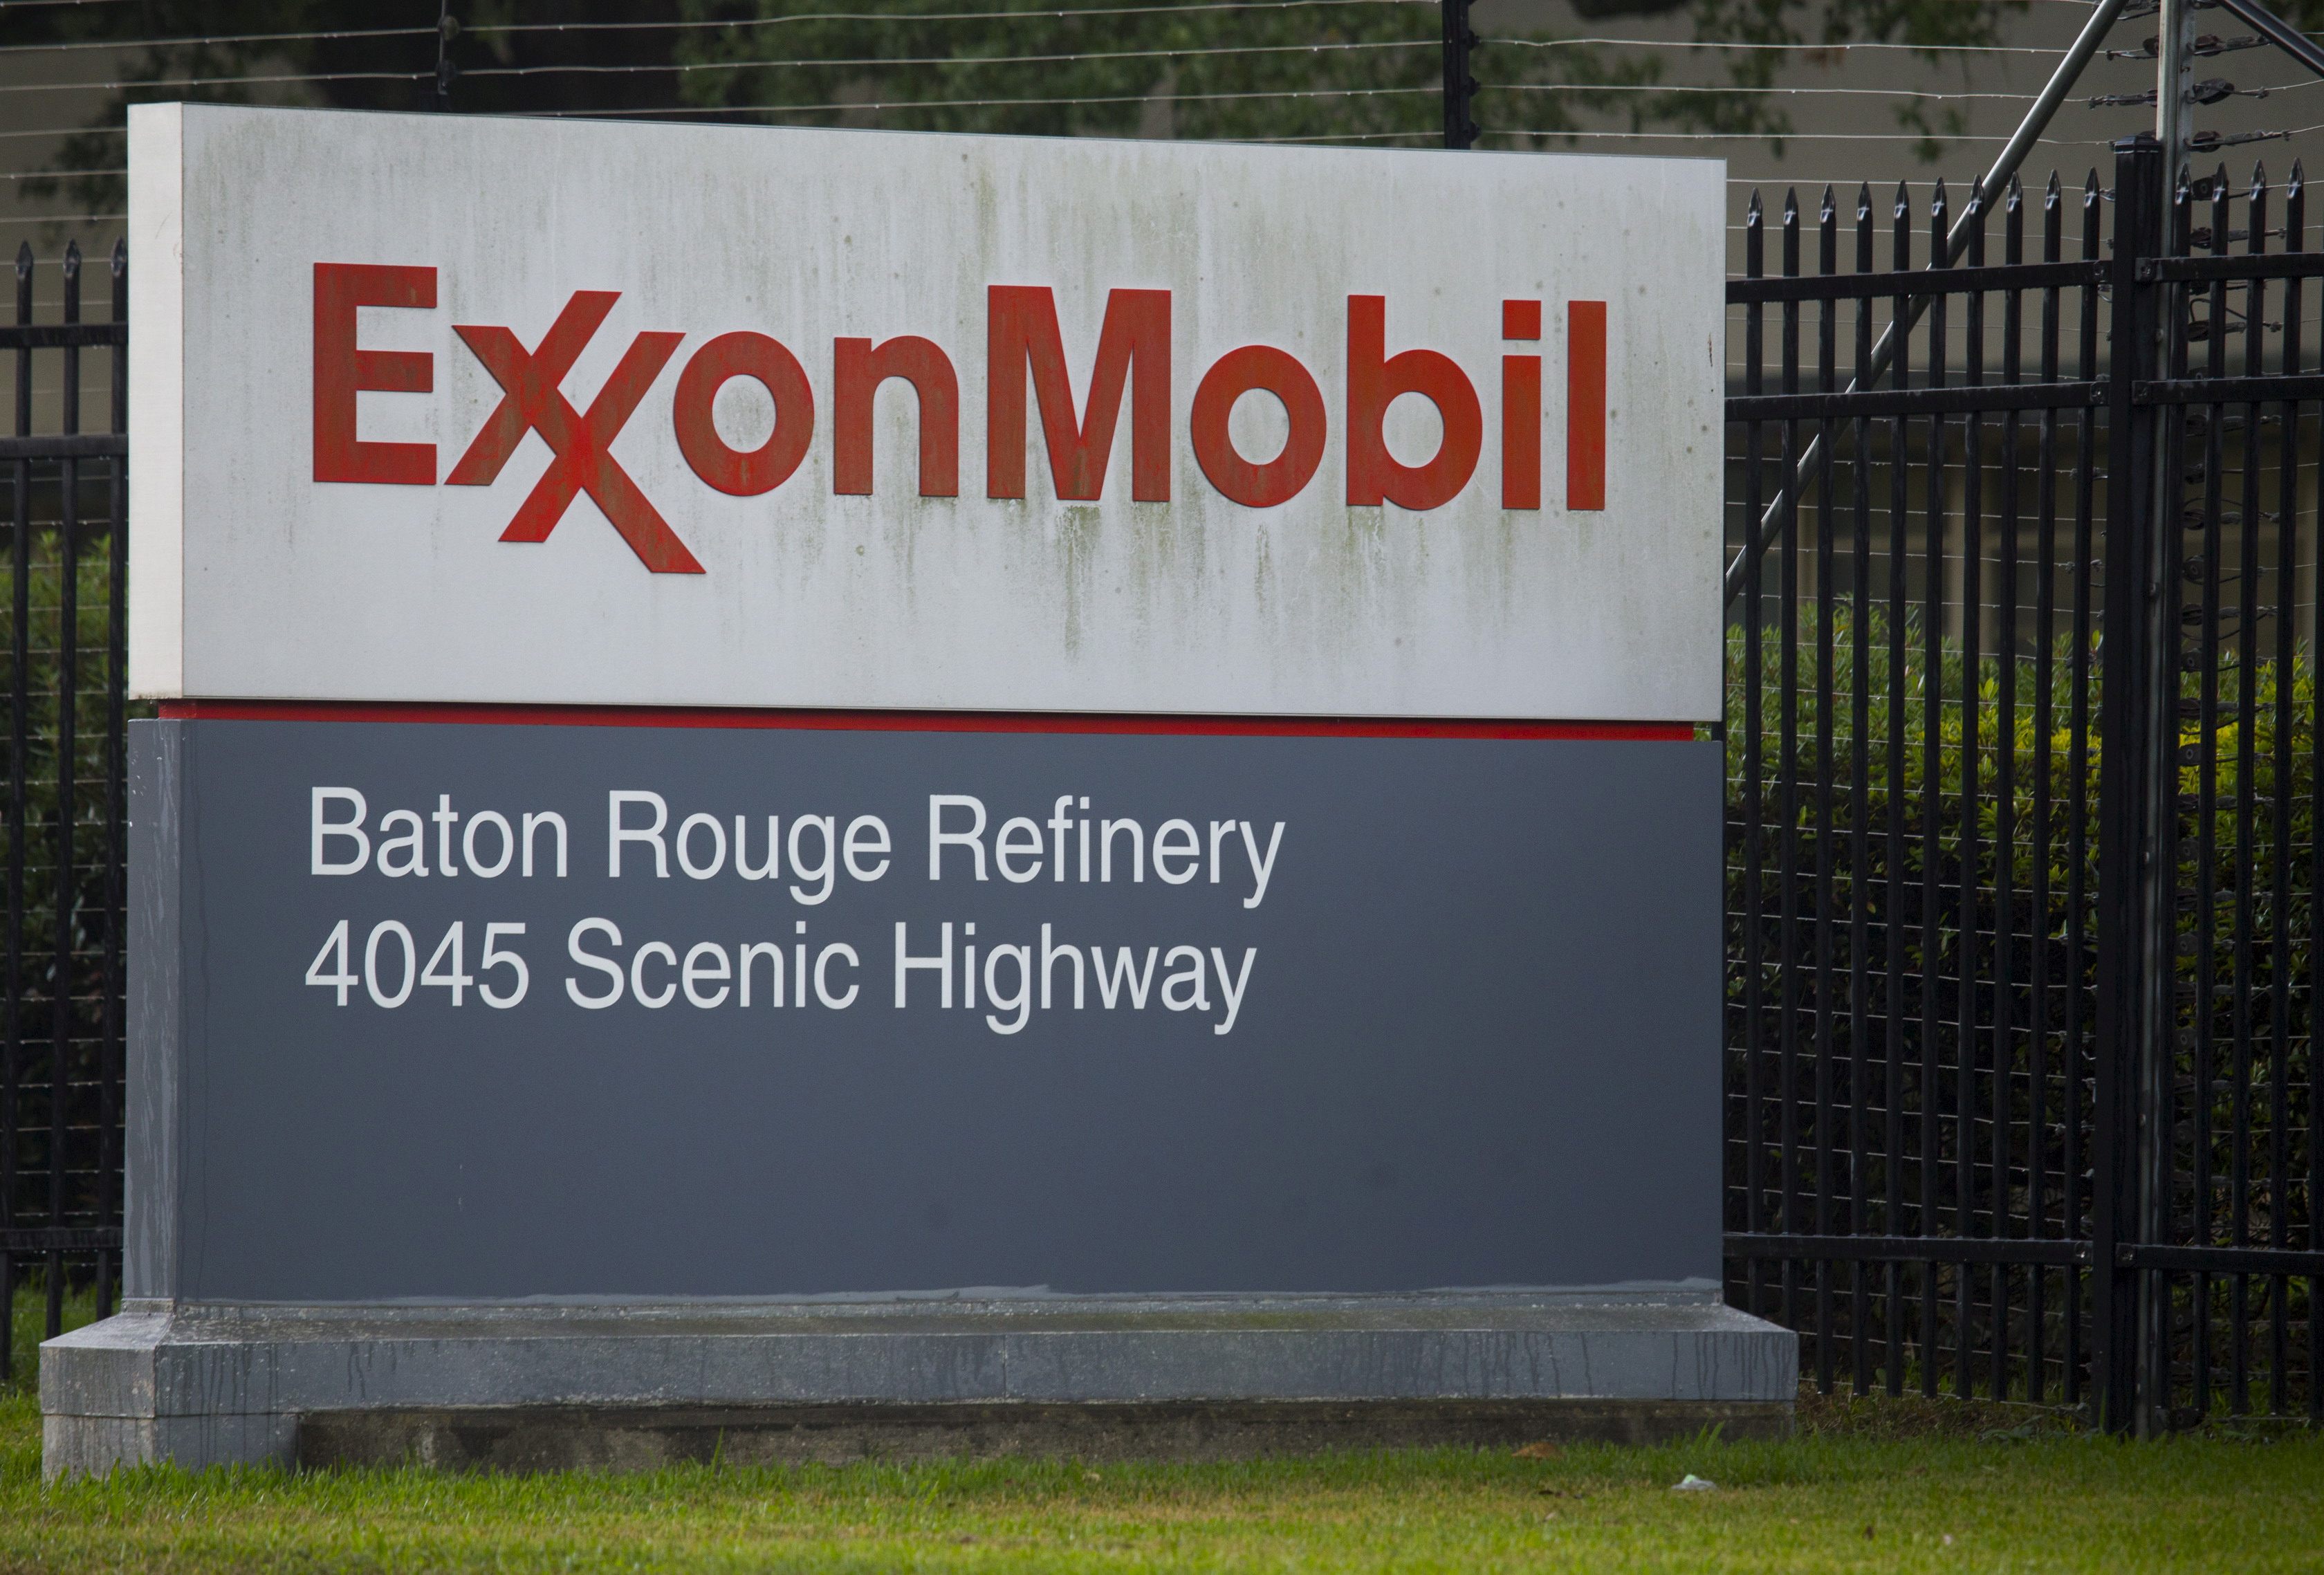 A sign is seen in front of the Exxonmobil Baton Rouge Refinery in Baton Rouge, Louisiana.